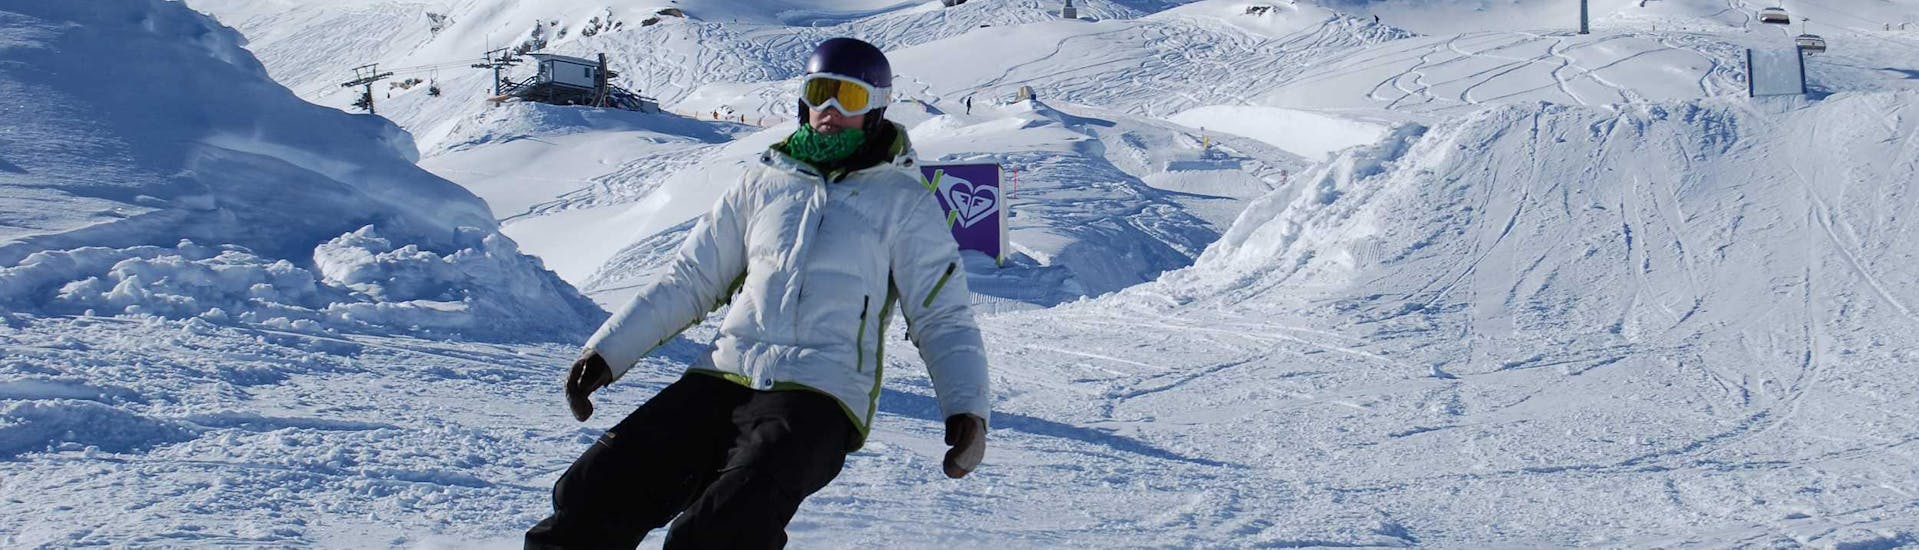 A snowboarder on the slopes during adult snowboarding lessons for beginners with ski school Ski Dome Viehhofen.